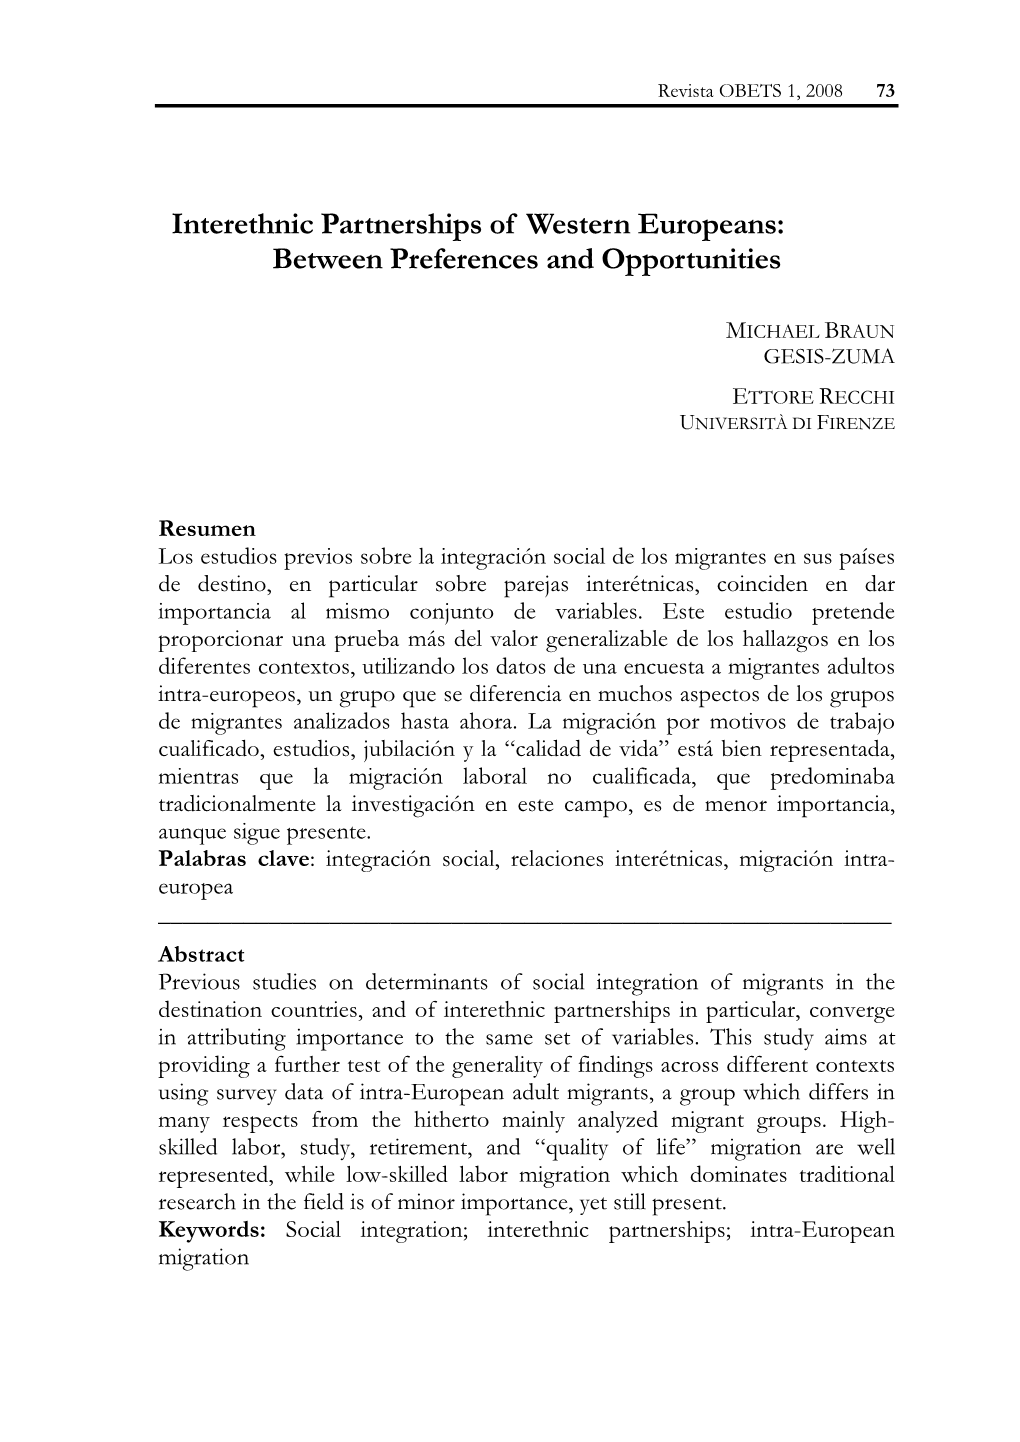 Interethnic Partnerships of Western Europeans: Between Preferences and Opportunities